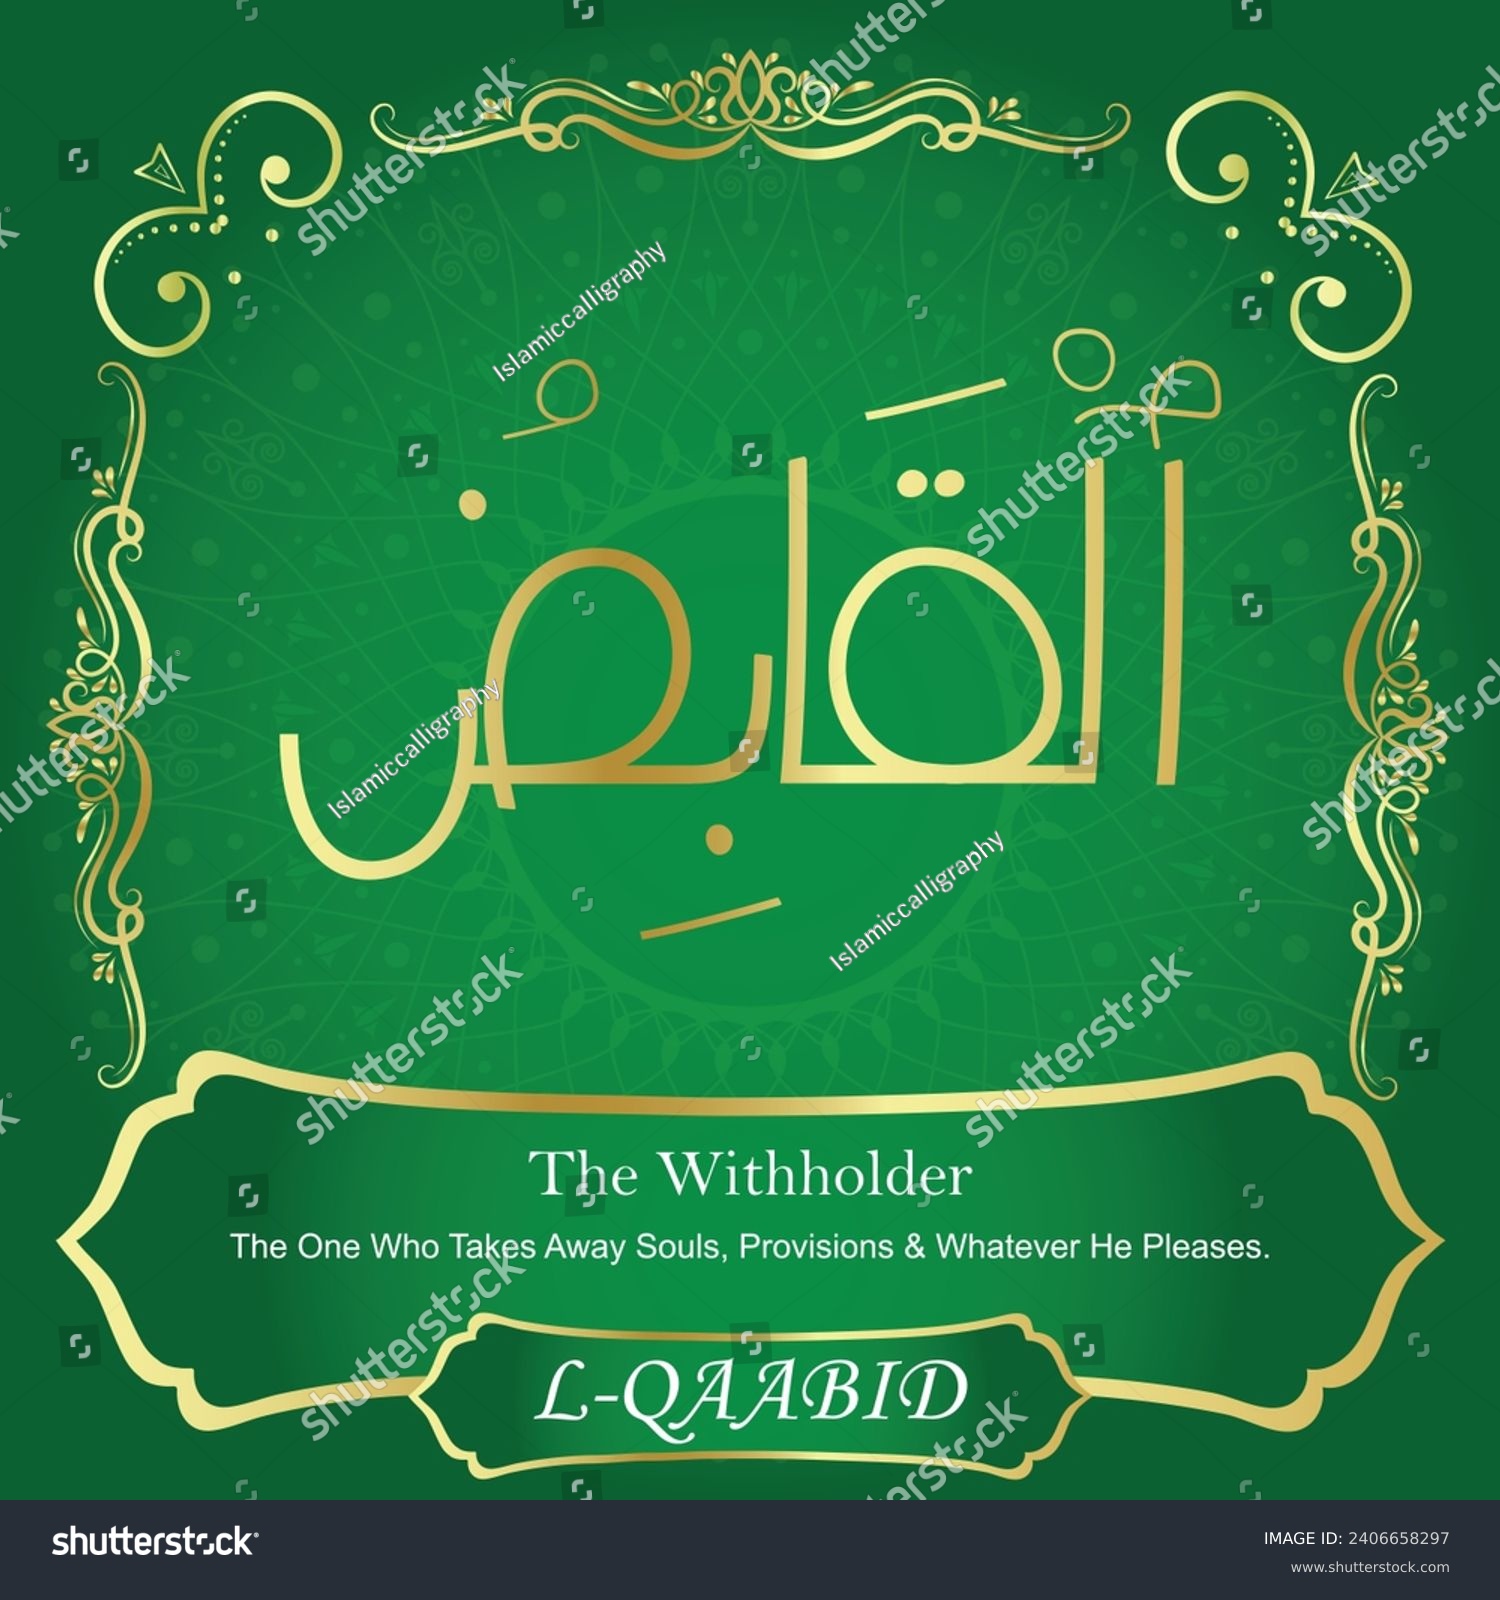 SVG of The Withholder.
The One Who Takes Away Souls, Provisions and Whatever He
Pleases. svg